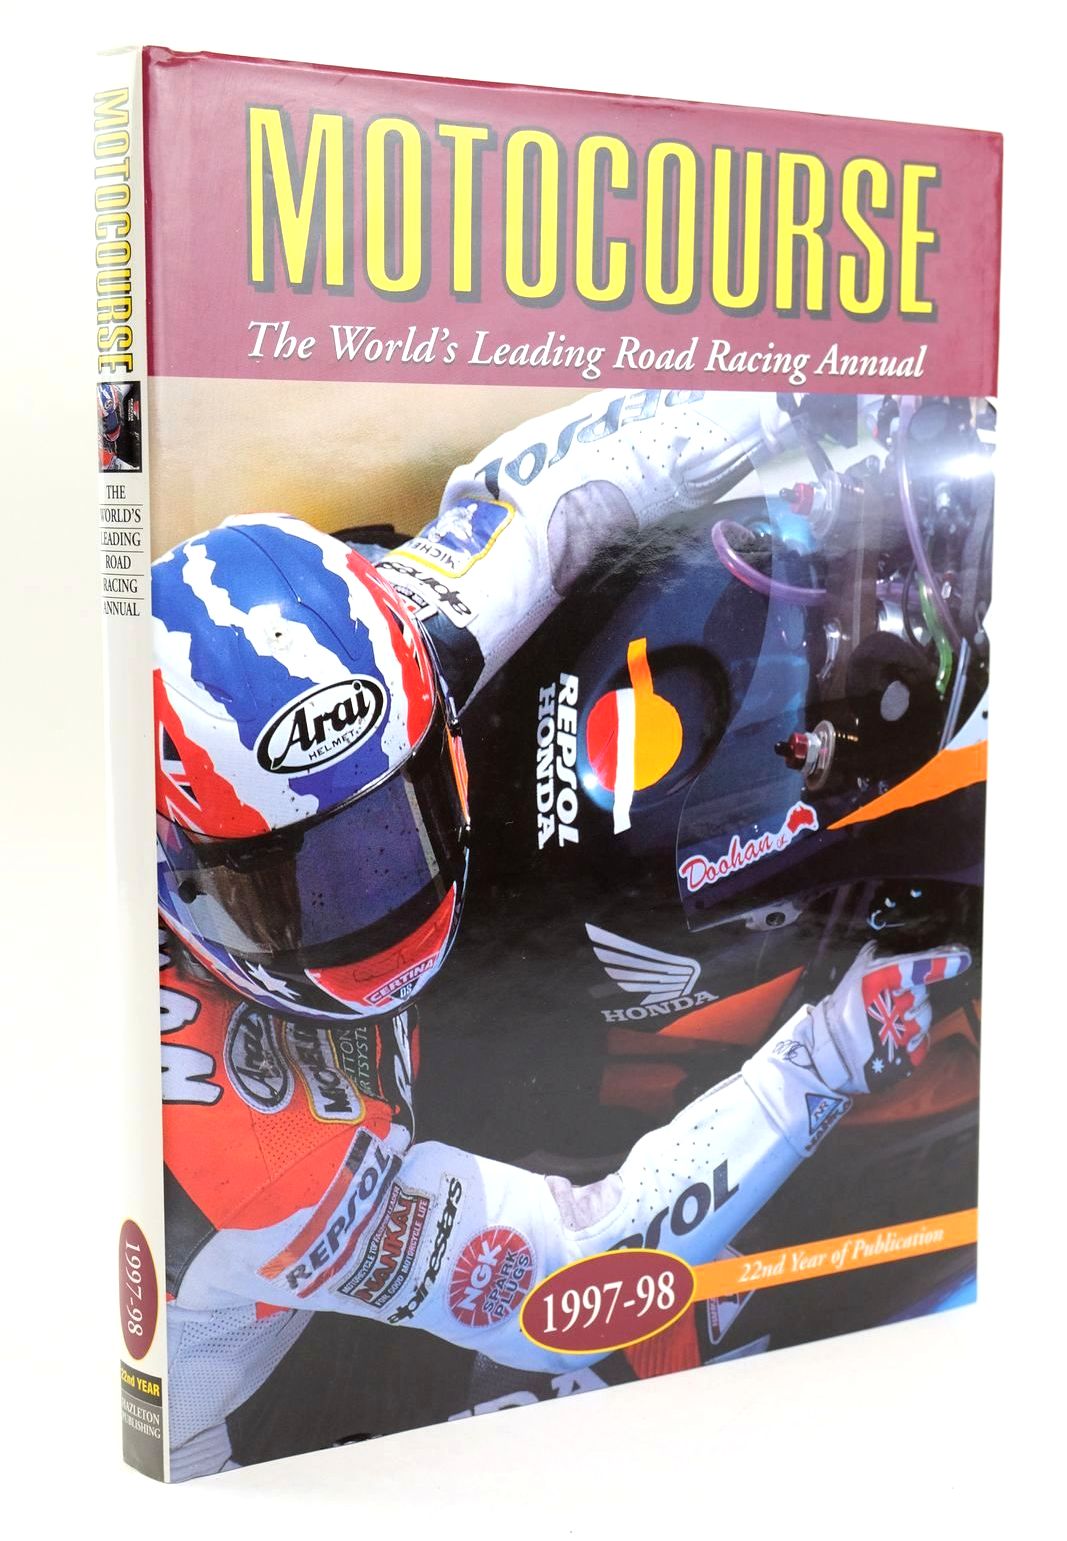 Photo of MOTOCOURSE 1997-98 published by Hazleton Publishing (STOCK CODE: 1319323)  for sale by Stella & Rose's Books